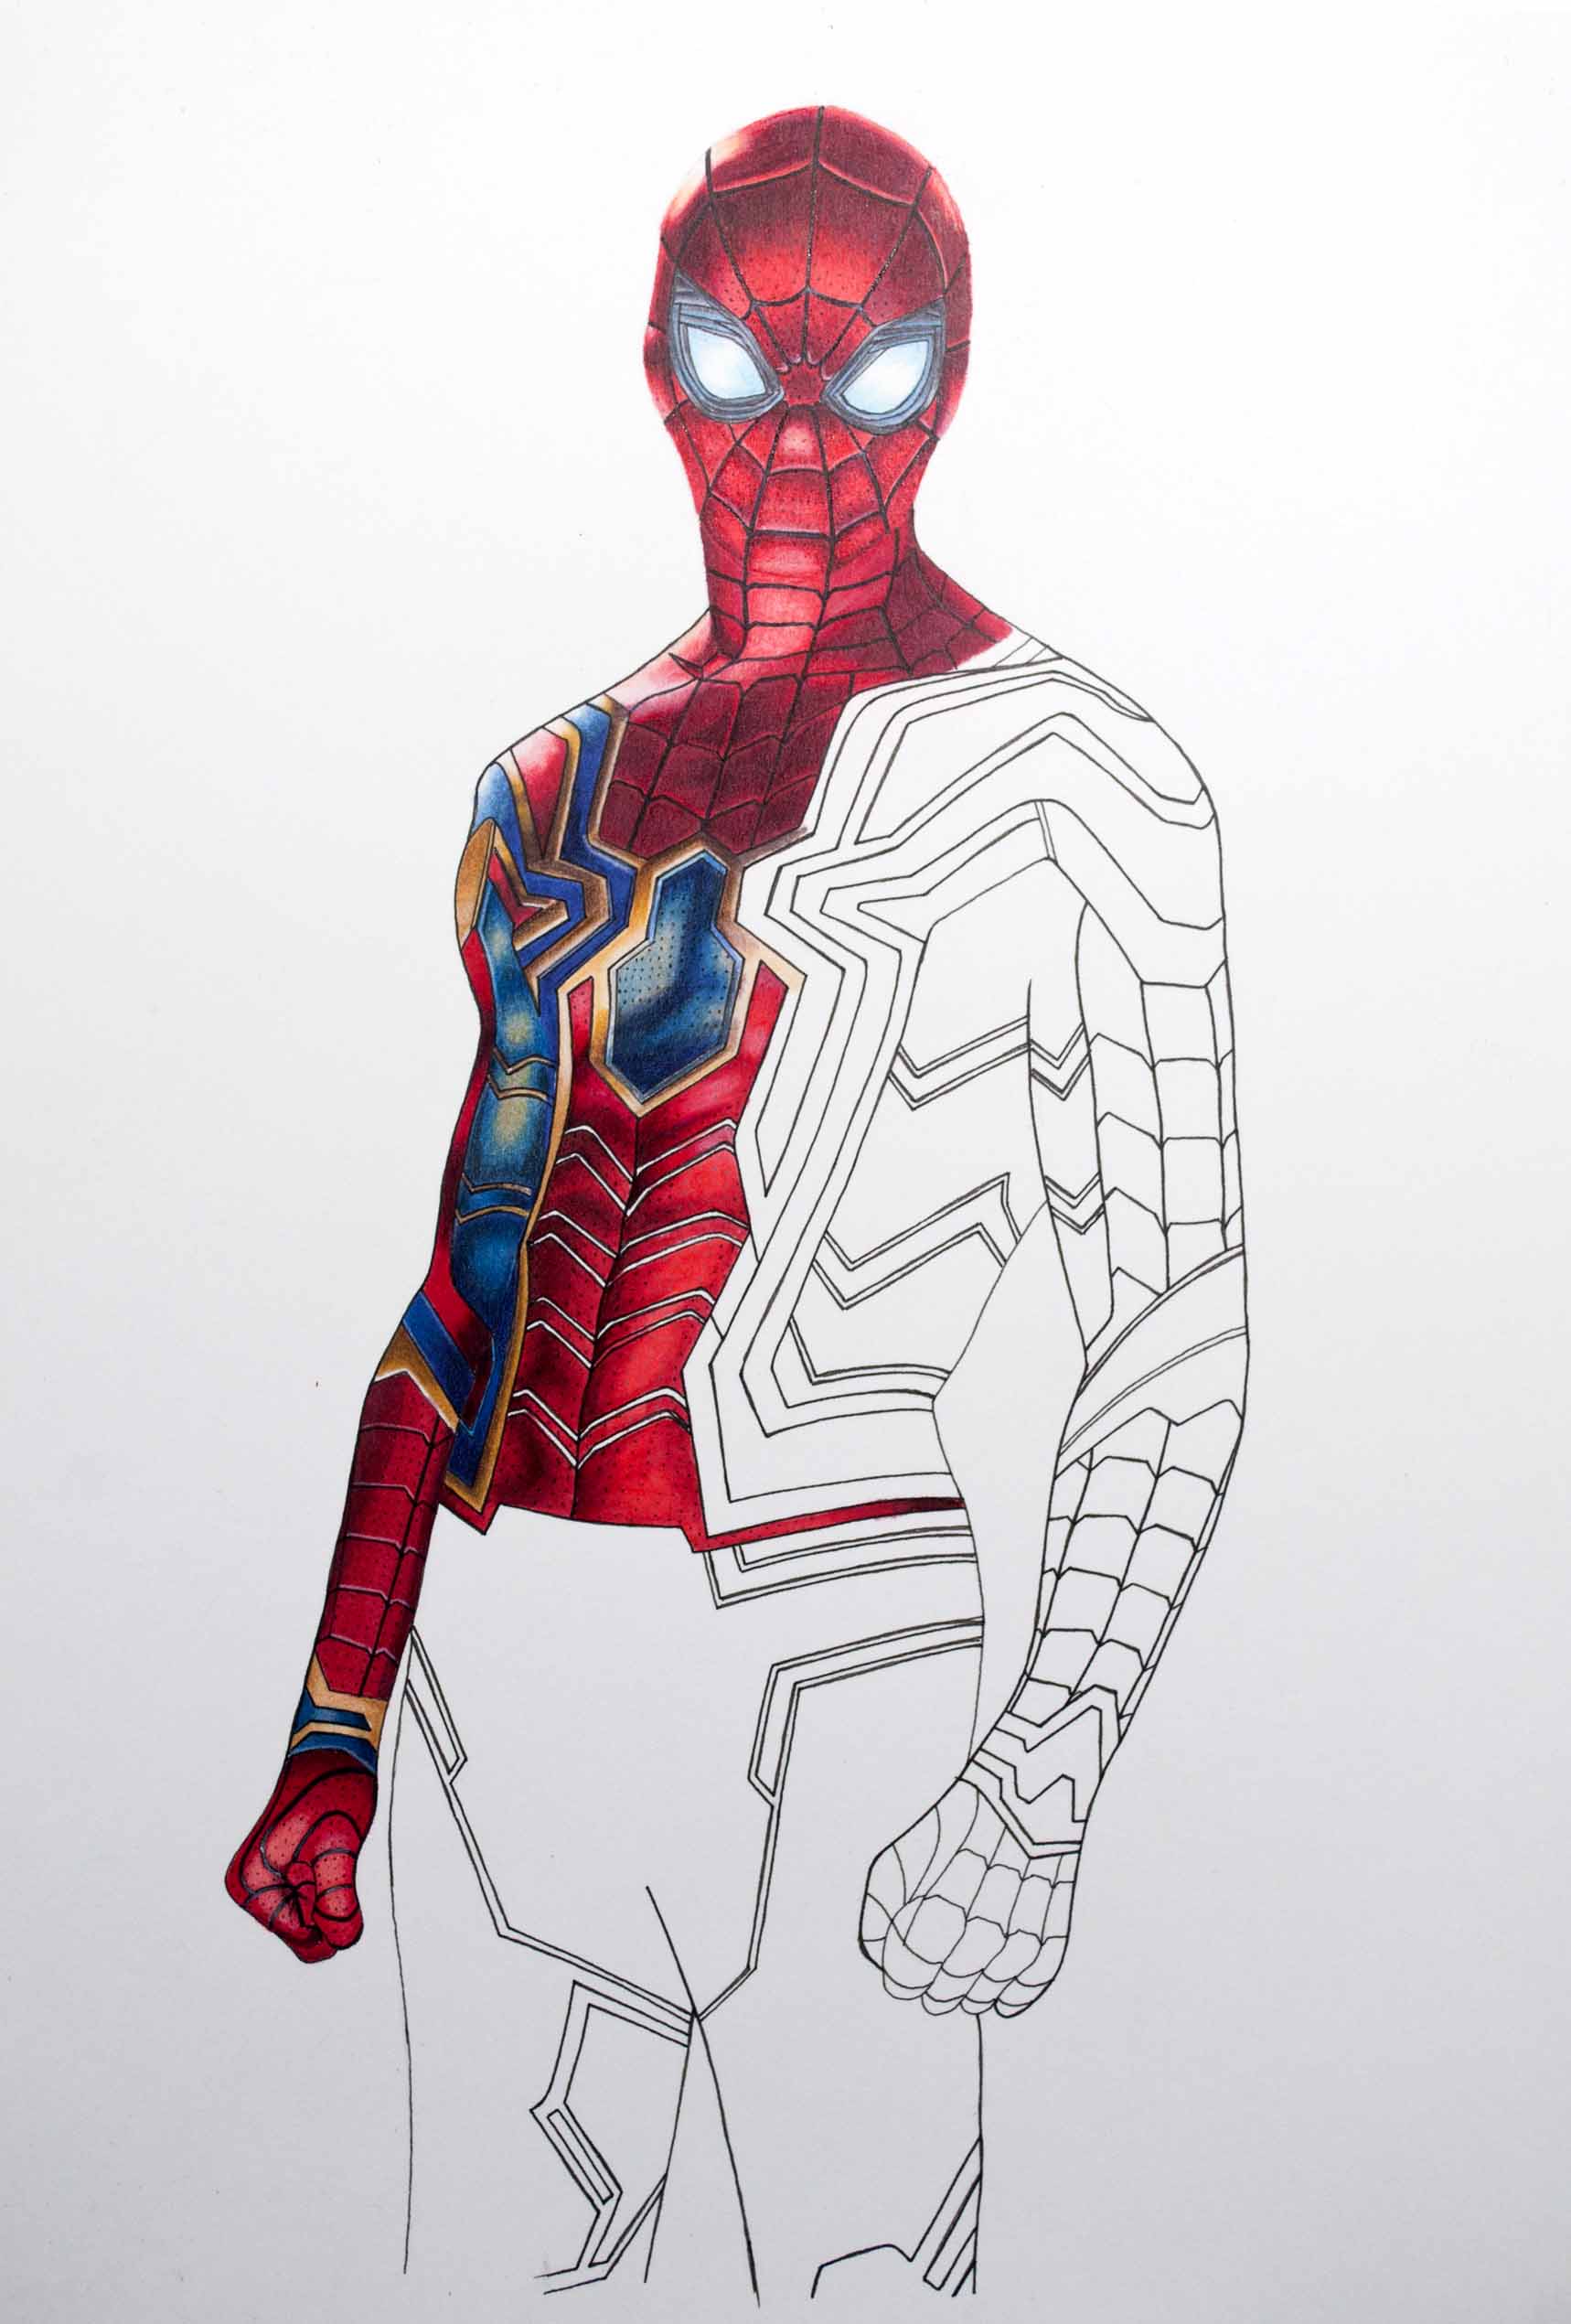 Discover more than 139 cool sketches of spiderman